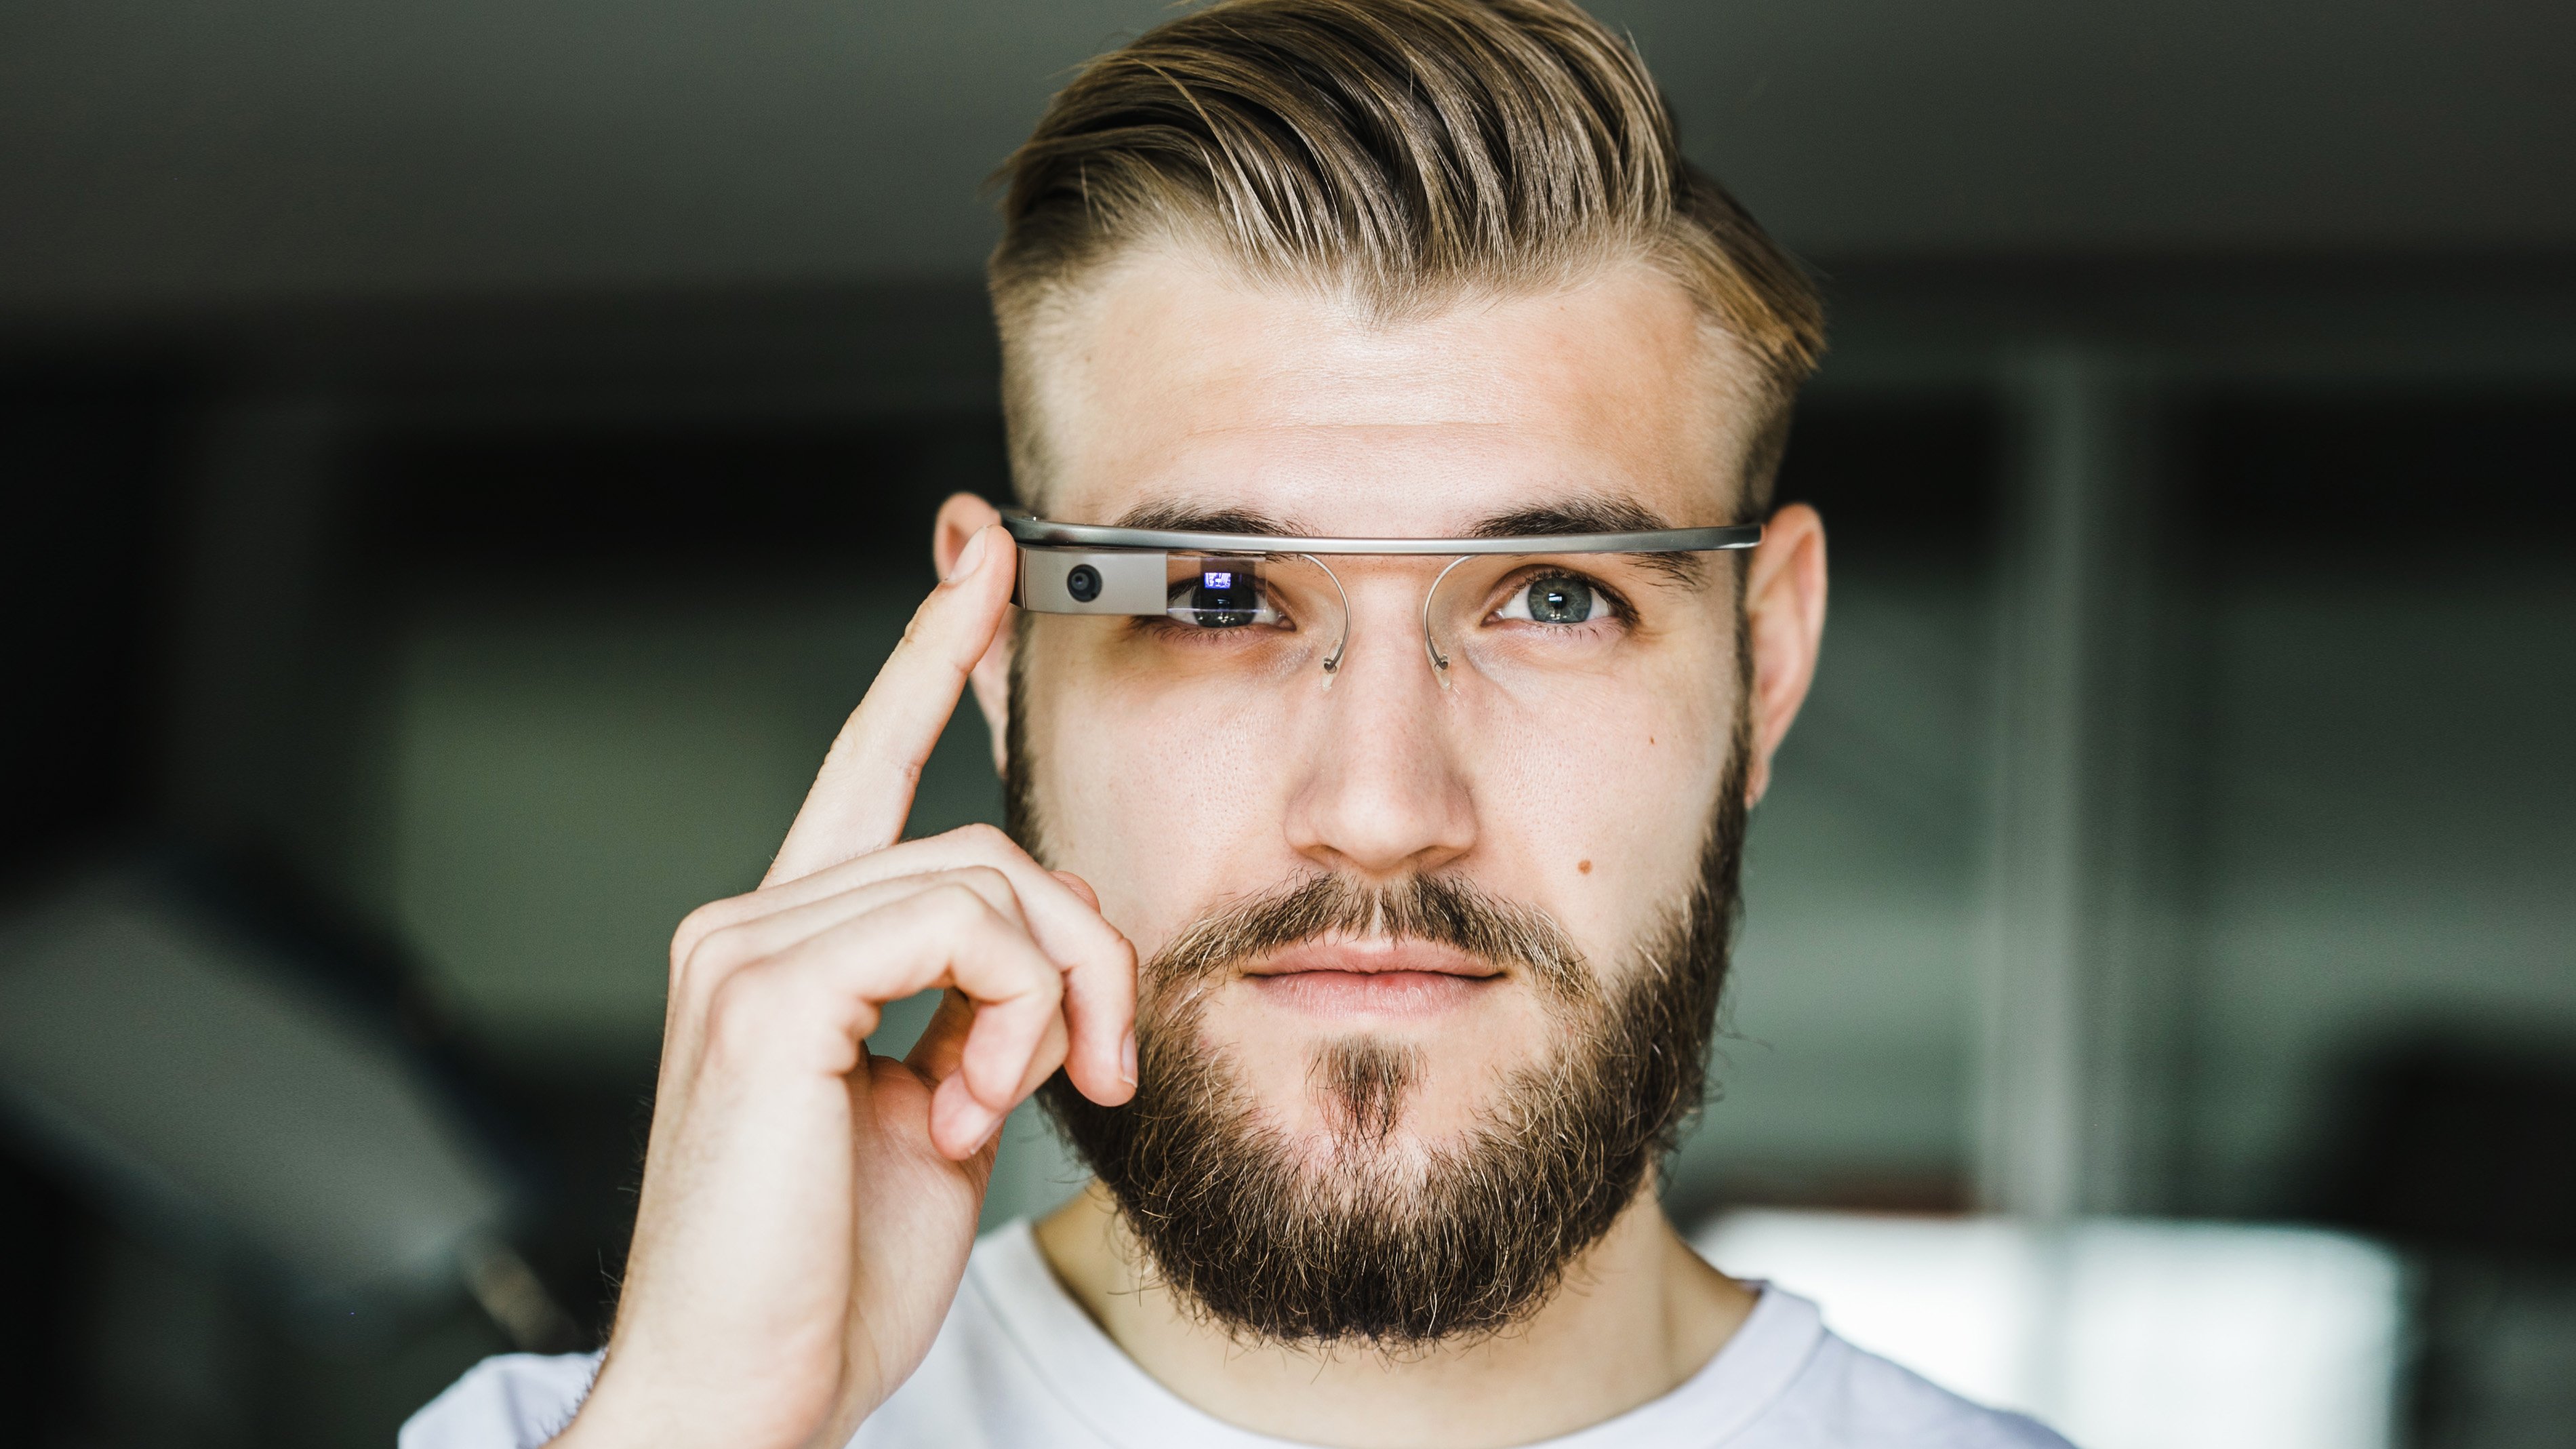 Smart Glasses Made Google Look Dumb. Now Facebook Is Giving Them a Try. -  The New York Times